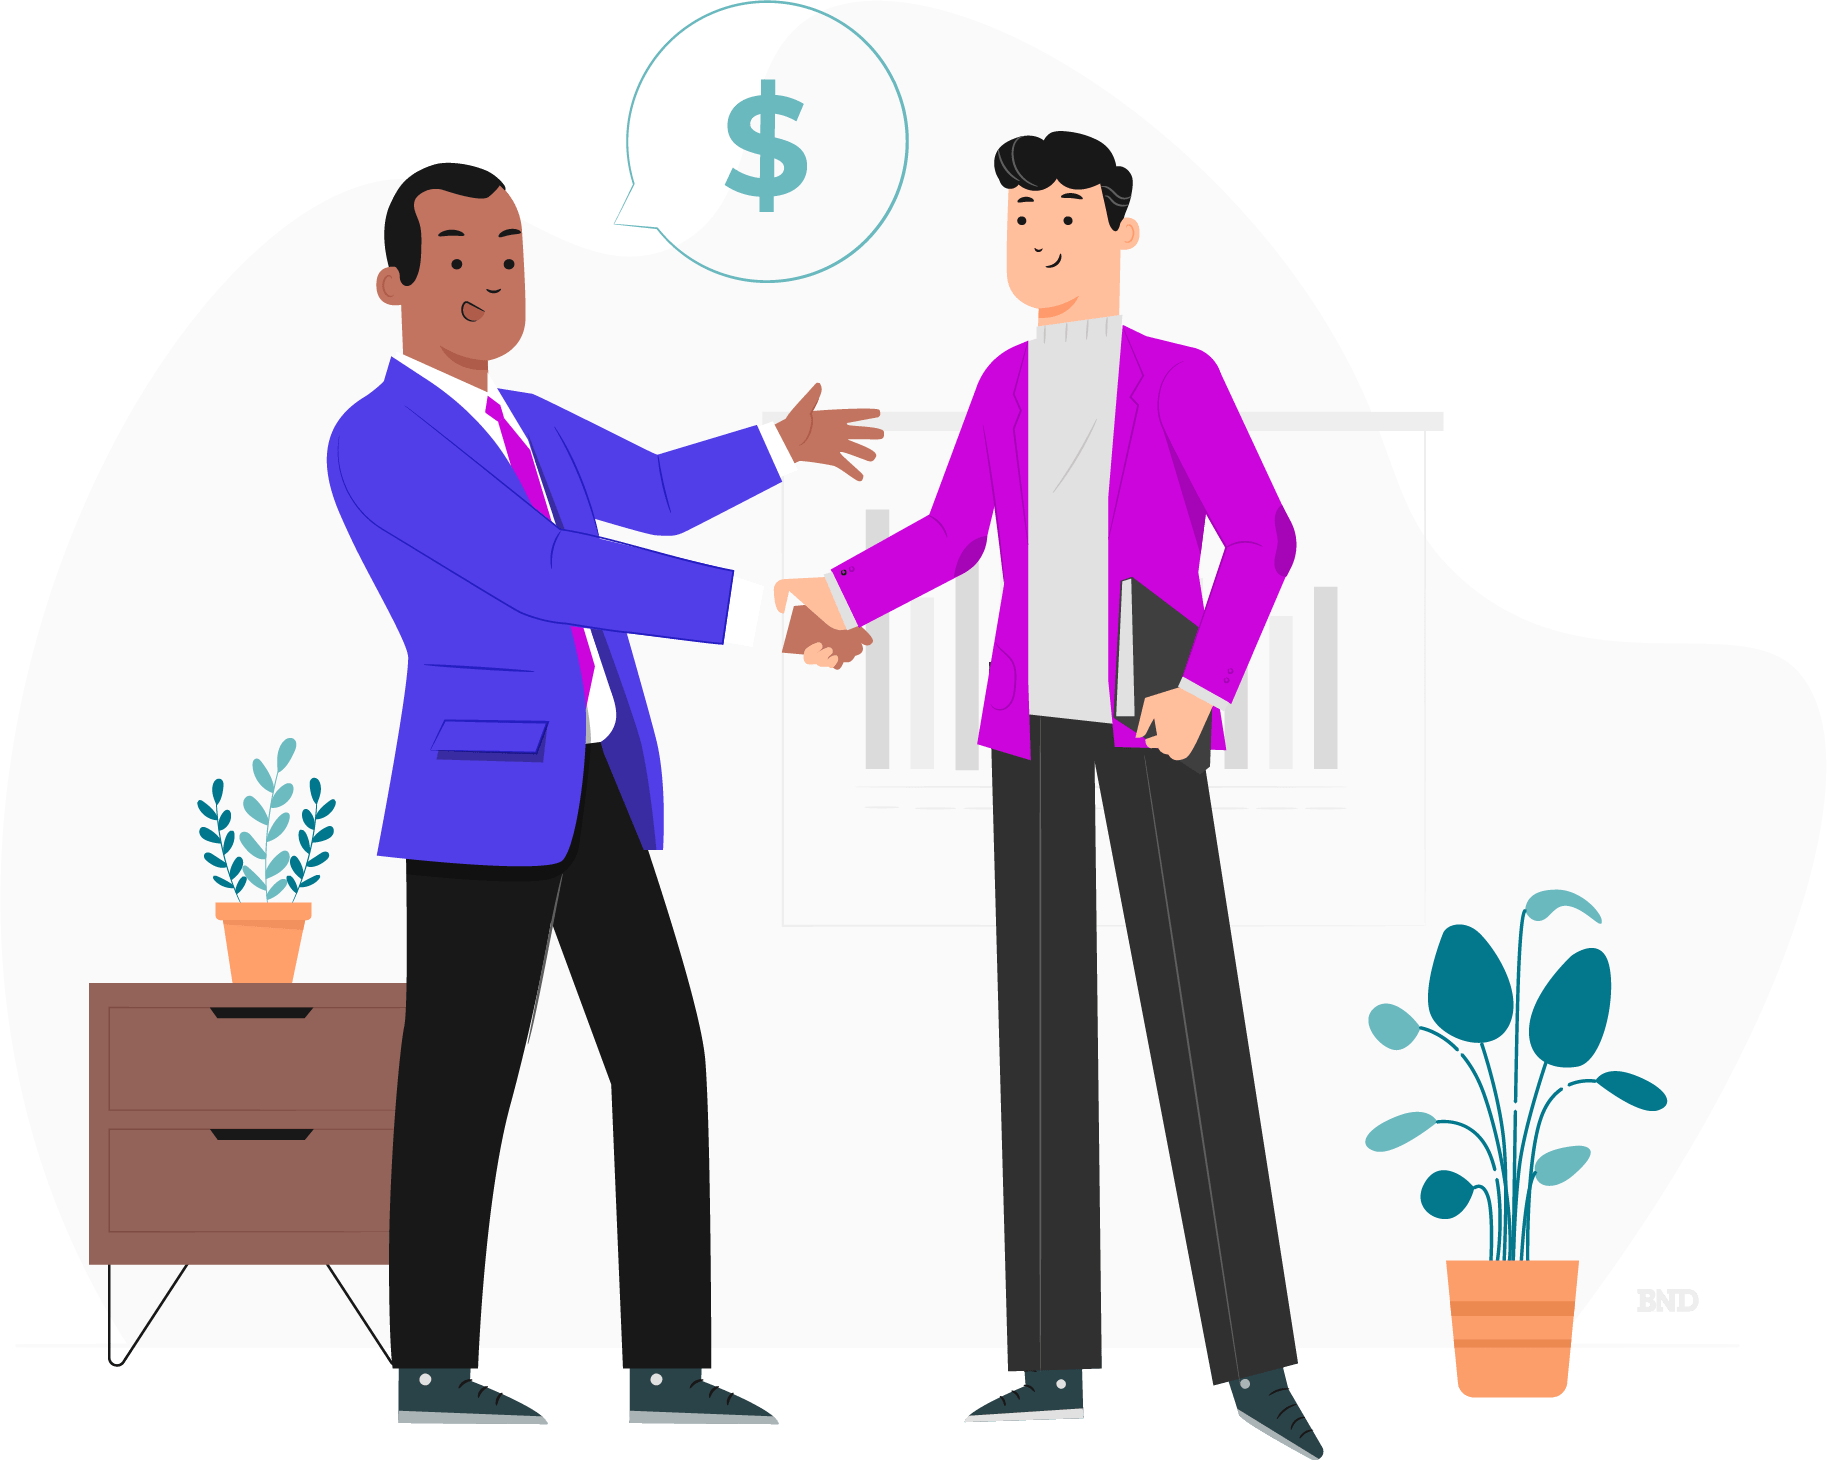 graphic of a boss and employee shaking hands with a money symbol above their heads